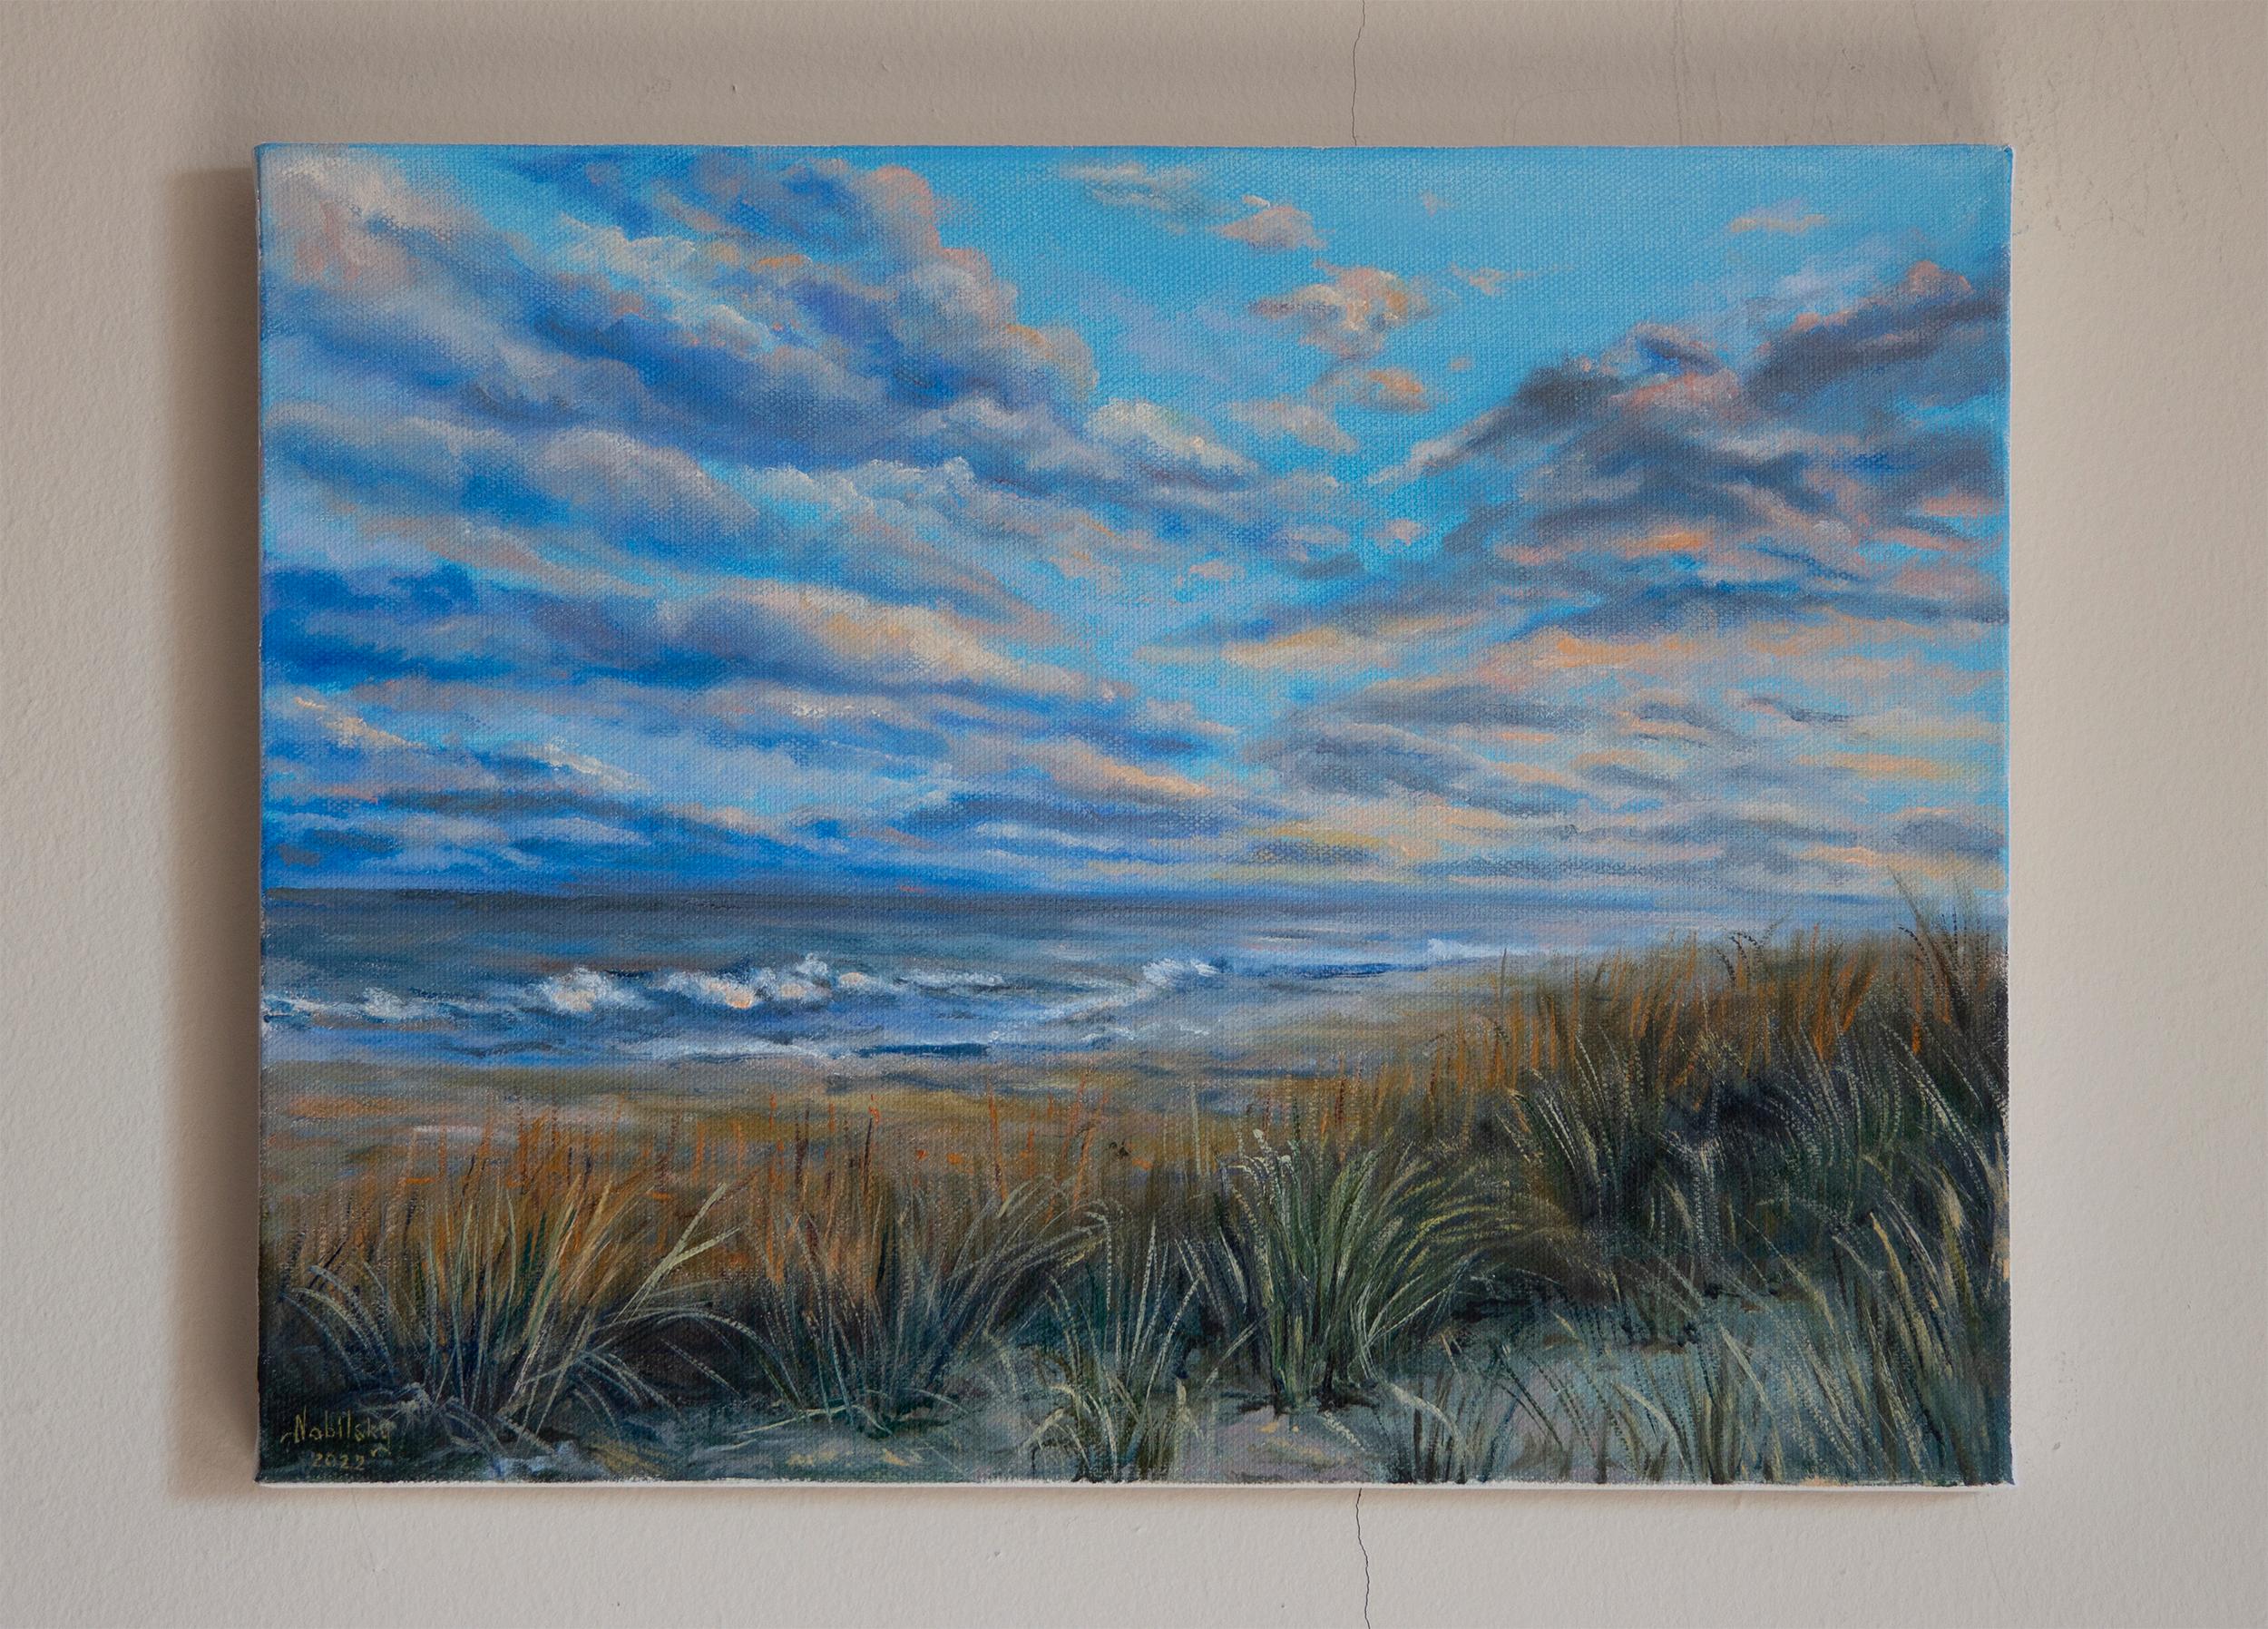 <p>Artist Comments<br />Inspired by an evening walk along the shores in the Hamptons, artist Olena Nabilsky captures the profound beauty of nature. Ocean sunsets continually mesmerize her, offering boundless inspiration for her work. Her composition